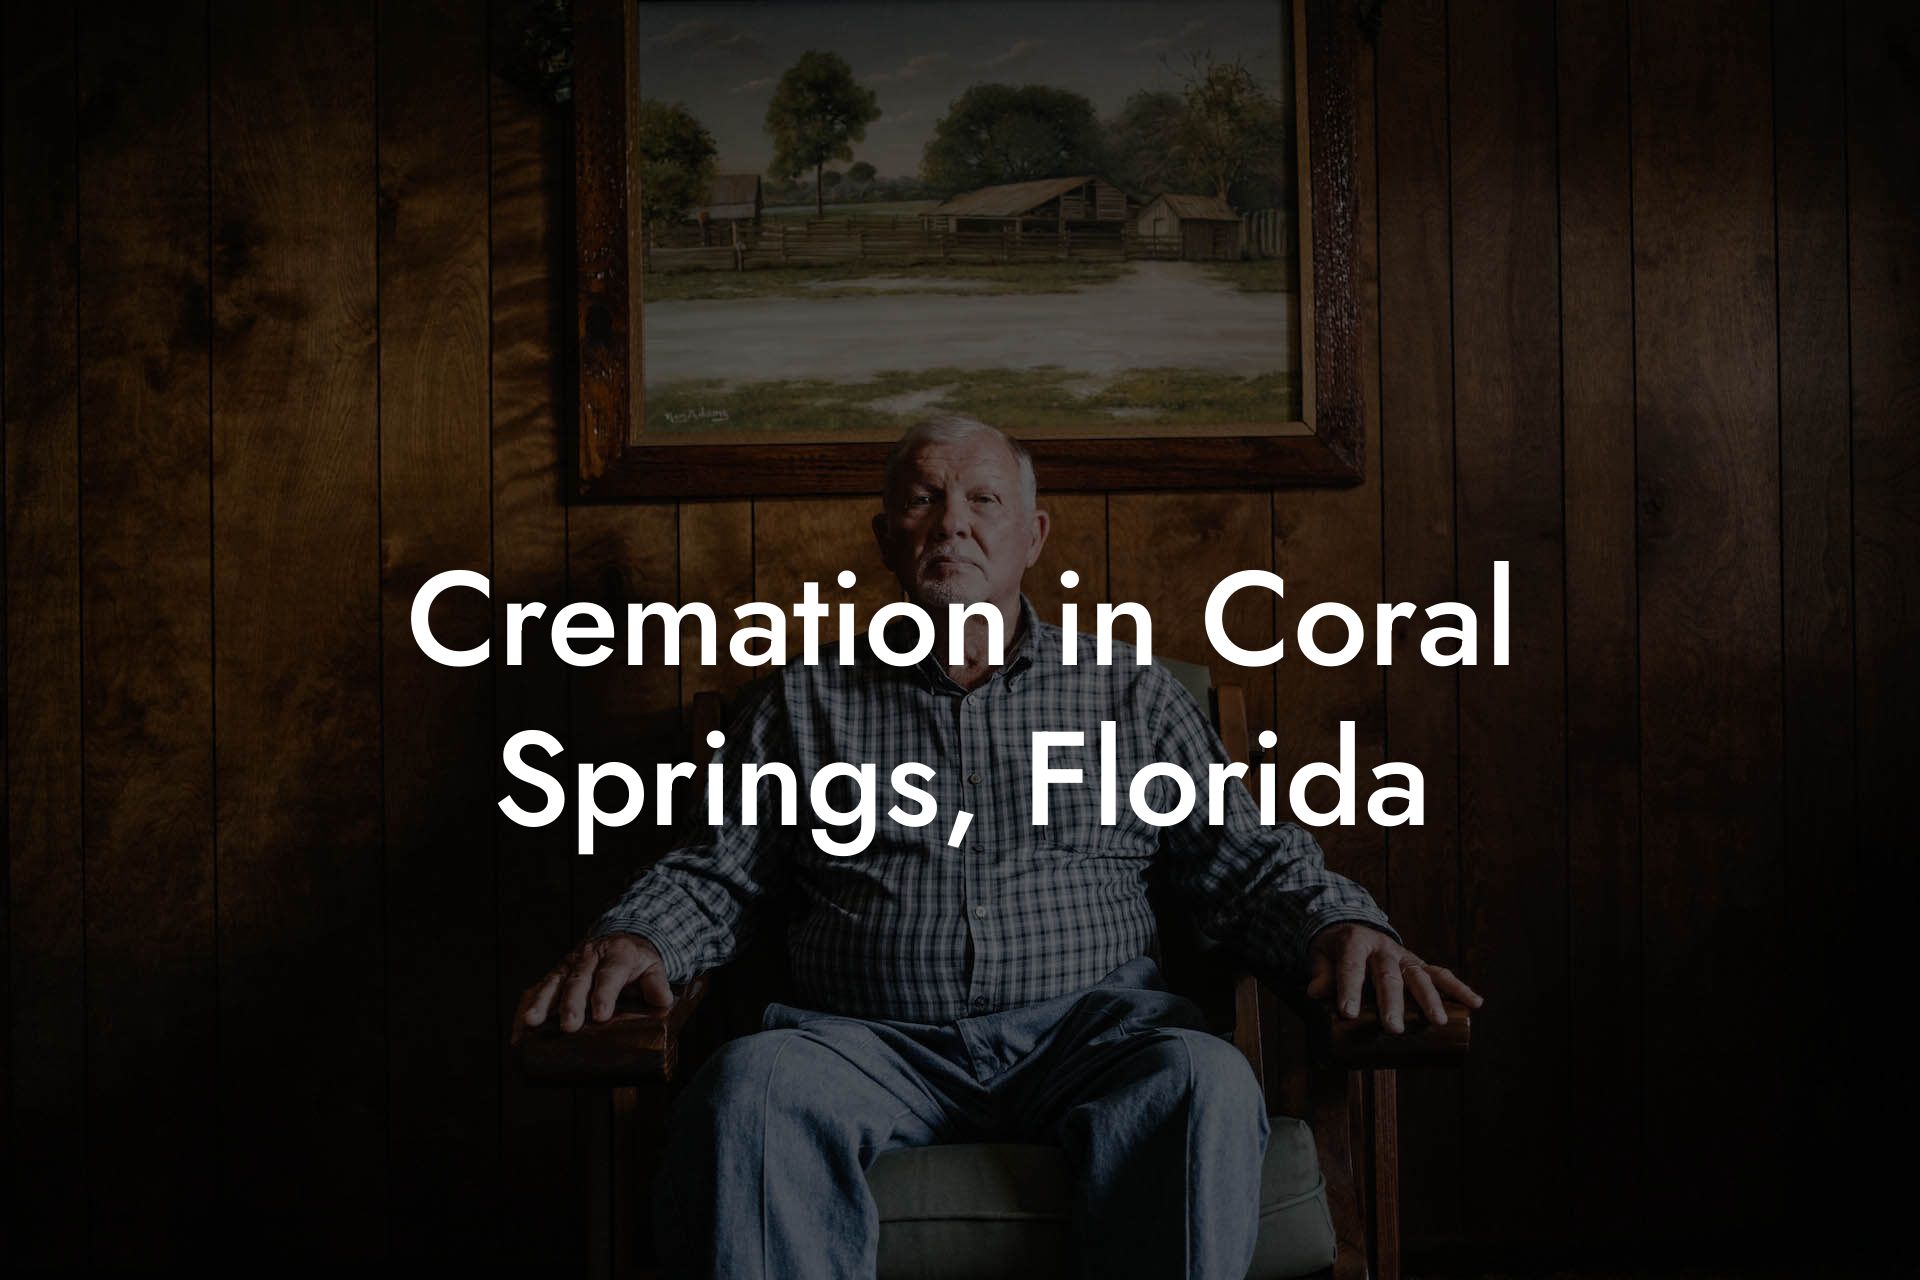 Cremation in Coral Springs, Florida